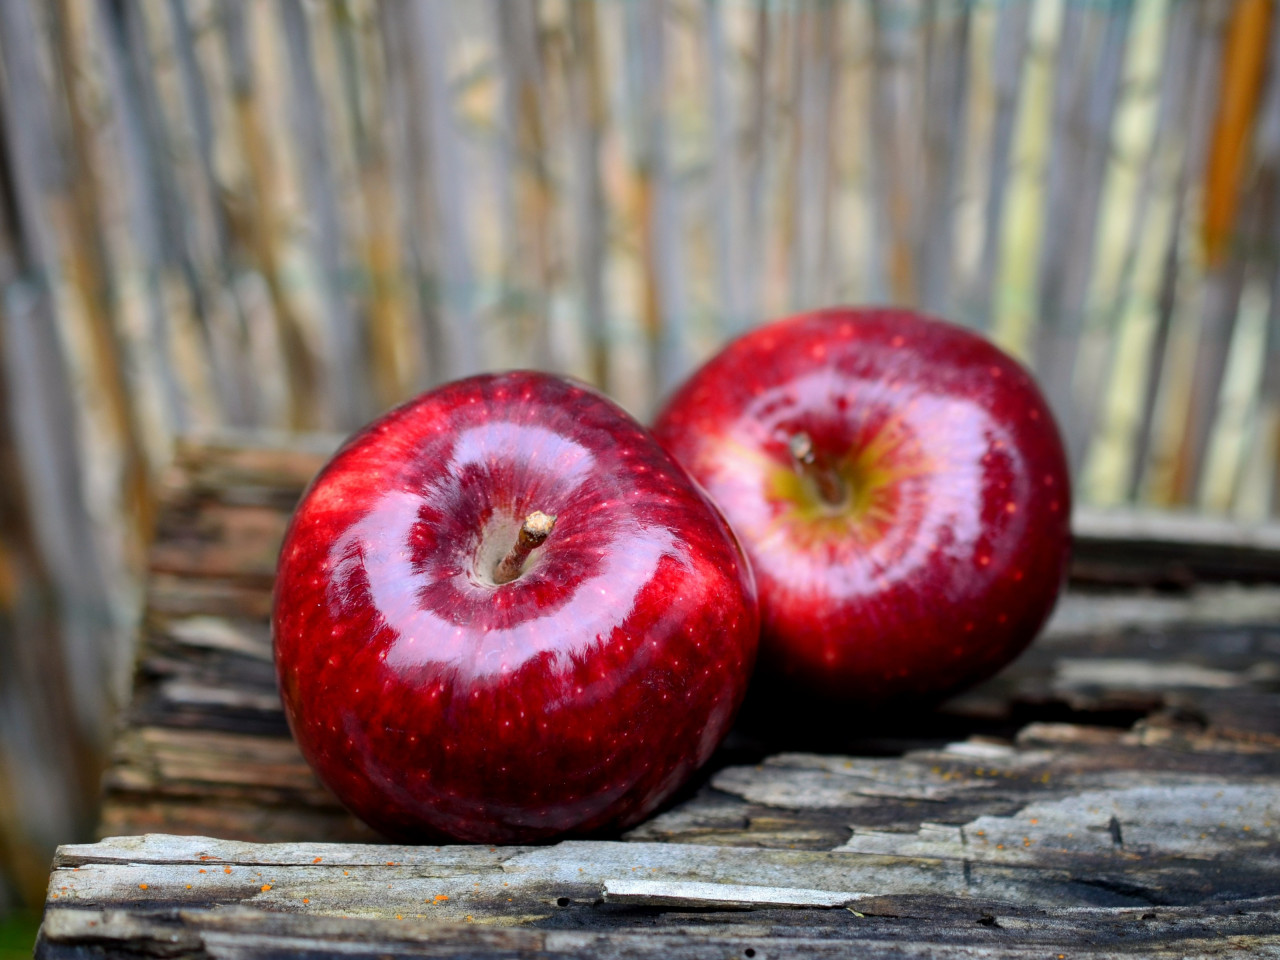 Delicious red apples wallpaper 1280x960